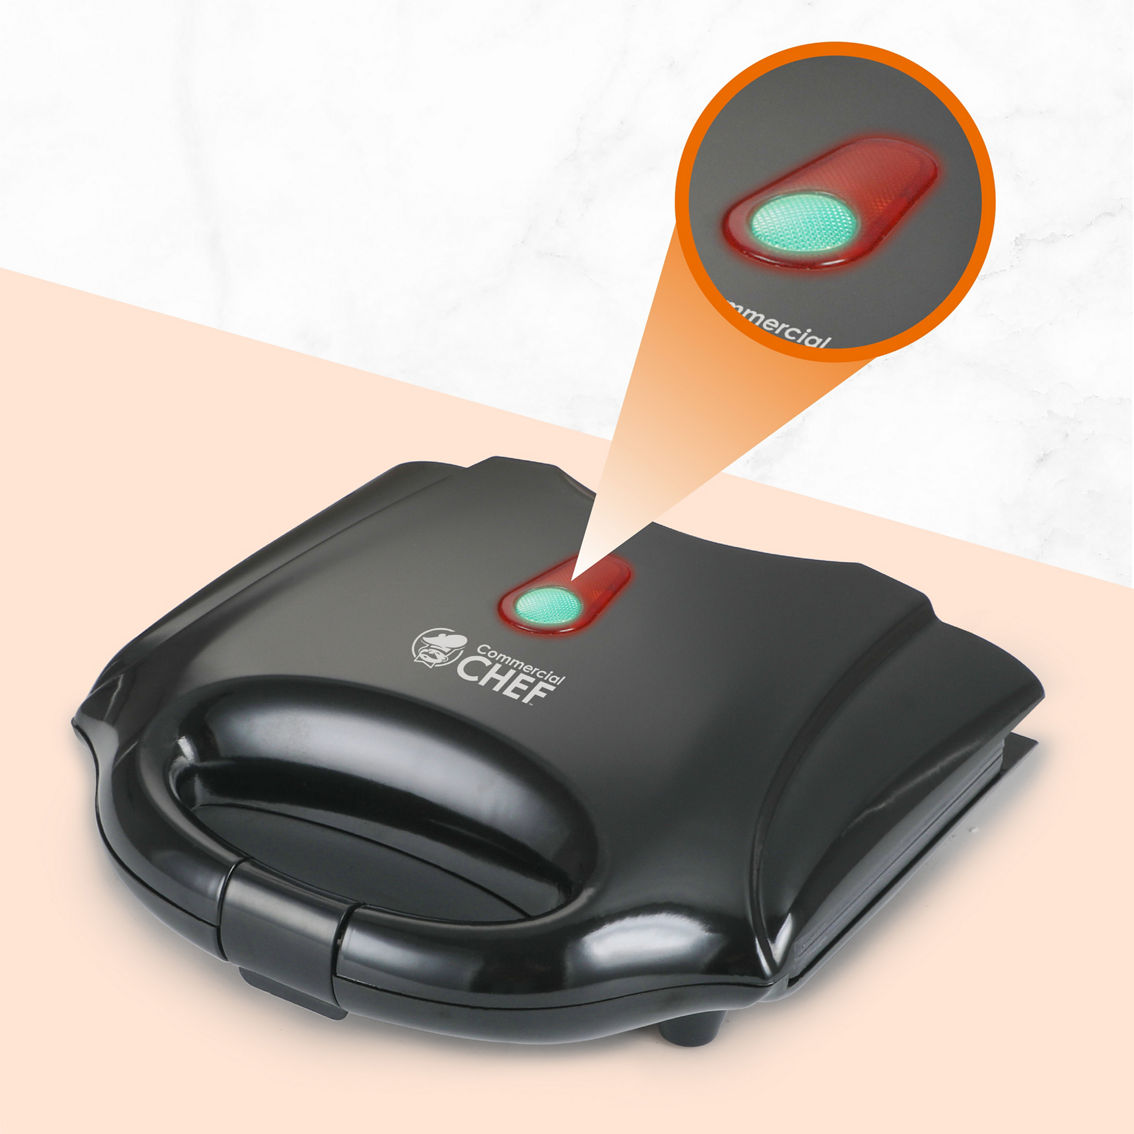 Commercial Chef Nonstick Mini Waffle Maker - Image 4 of 7